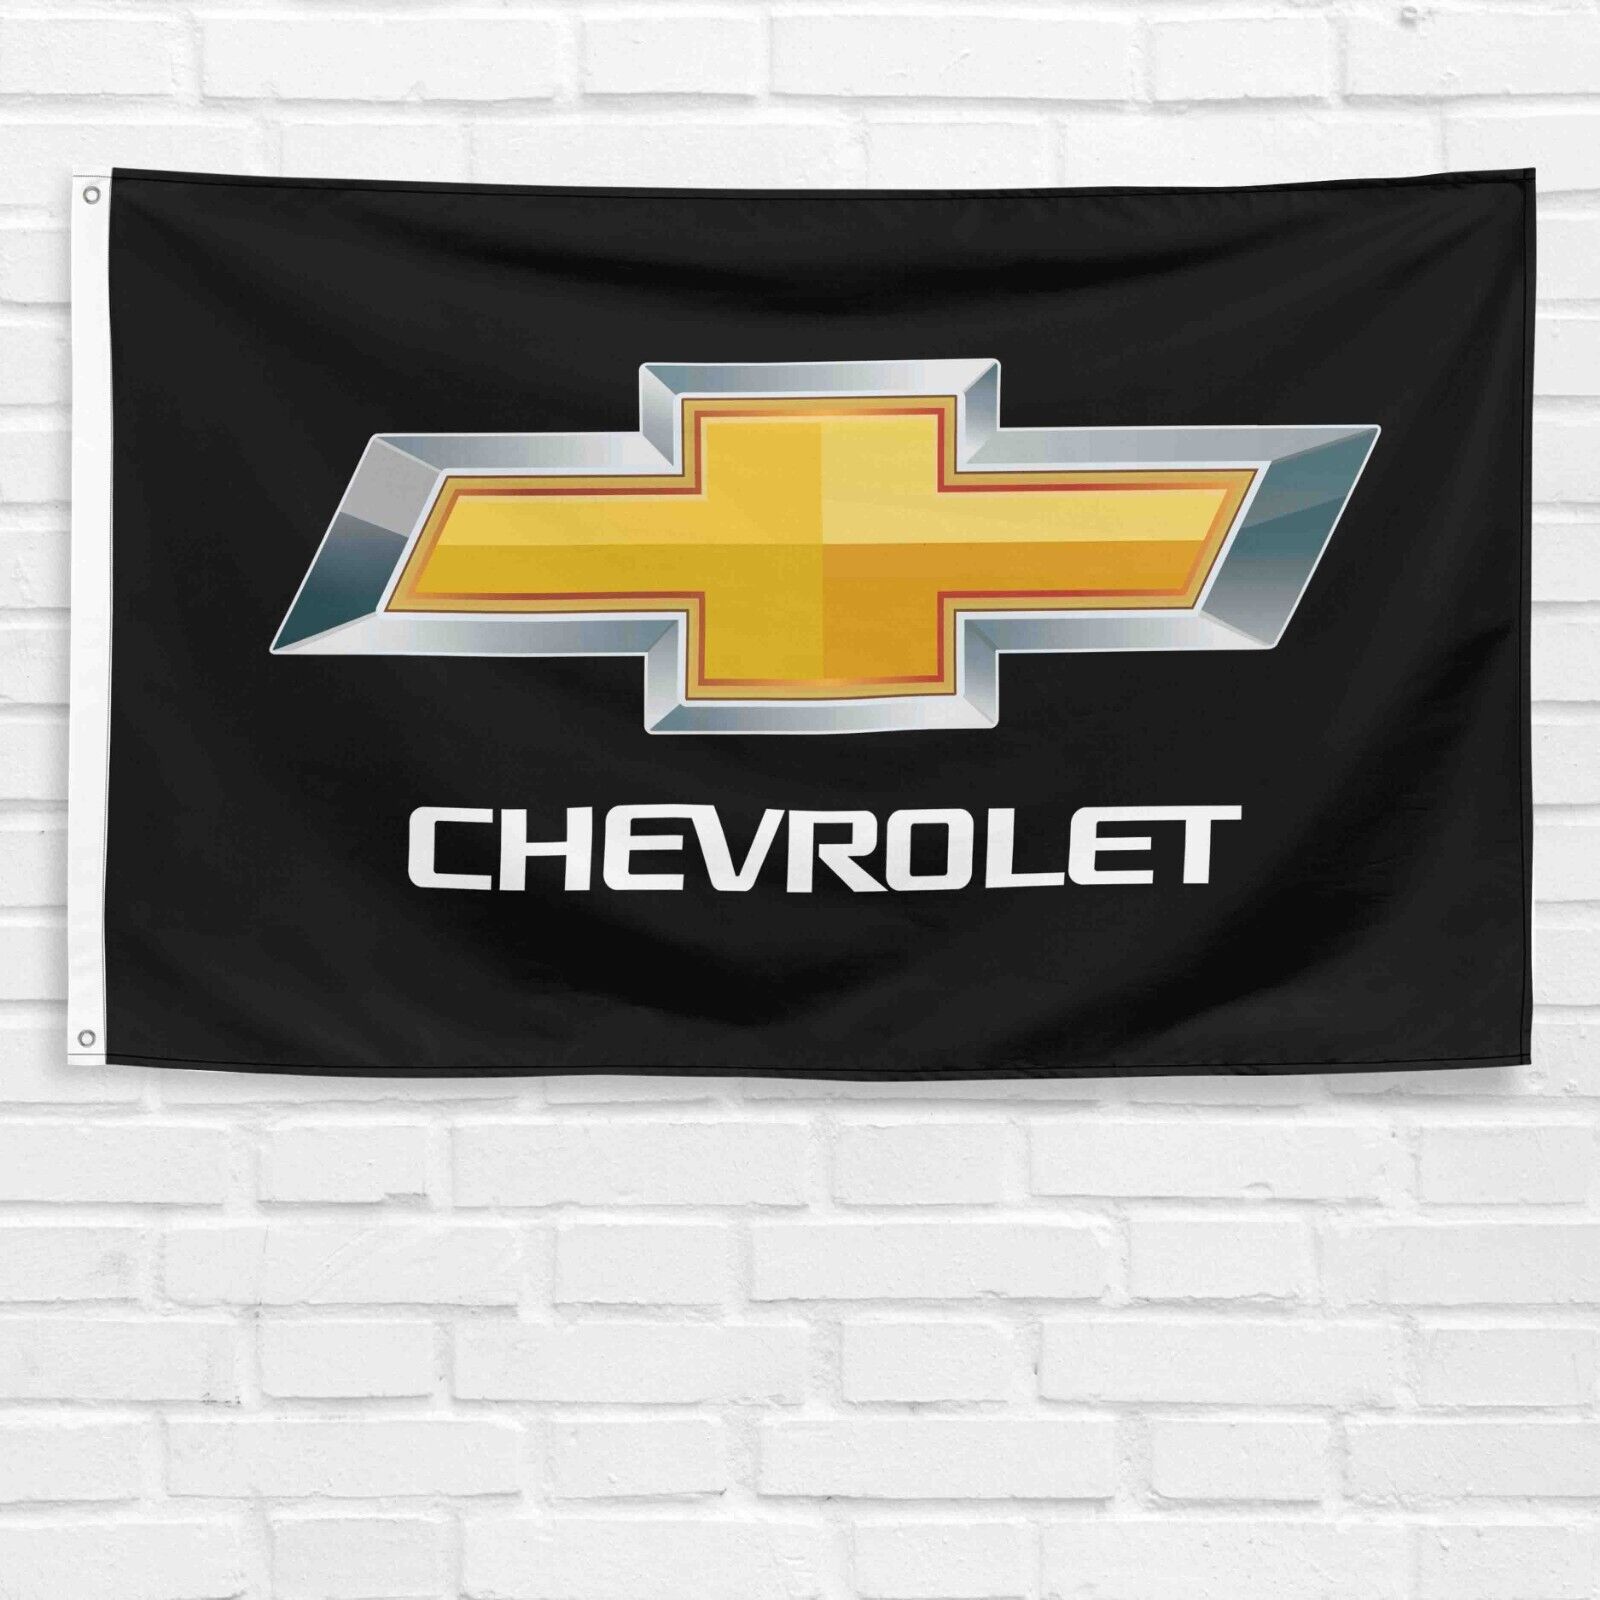 For Chevrolet Car Enthusiasts 3x5 ft Flag Chevy Truck Racing Garage Banner